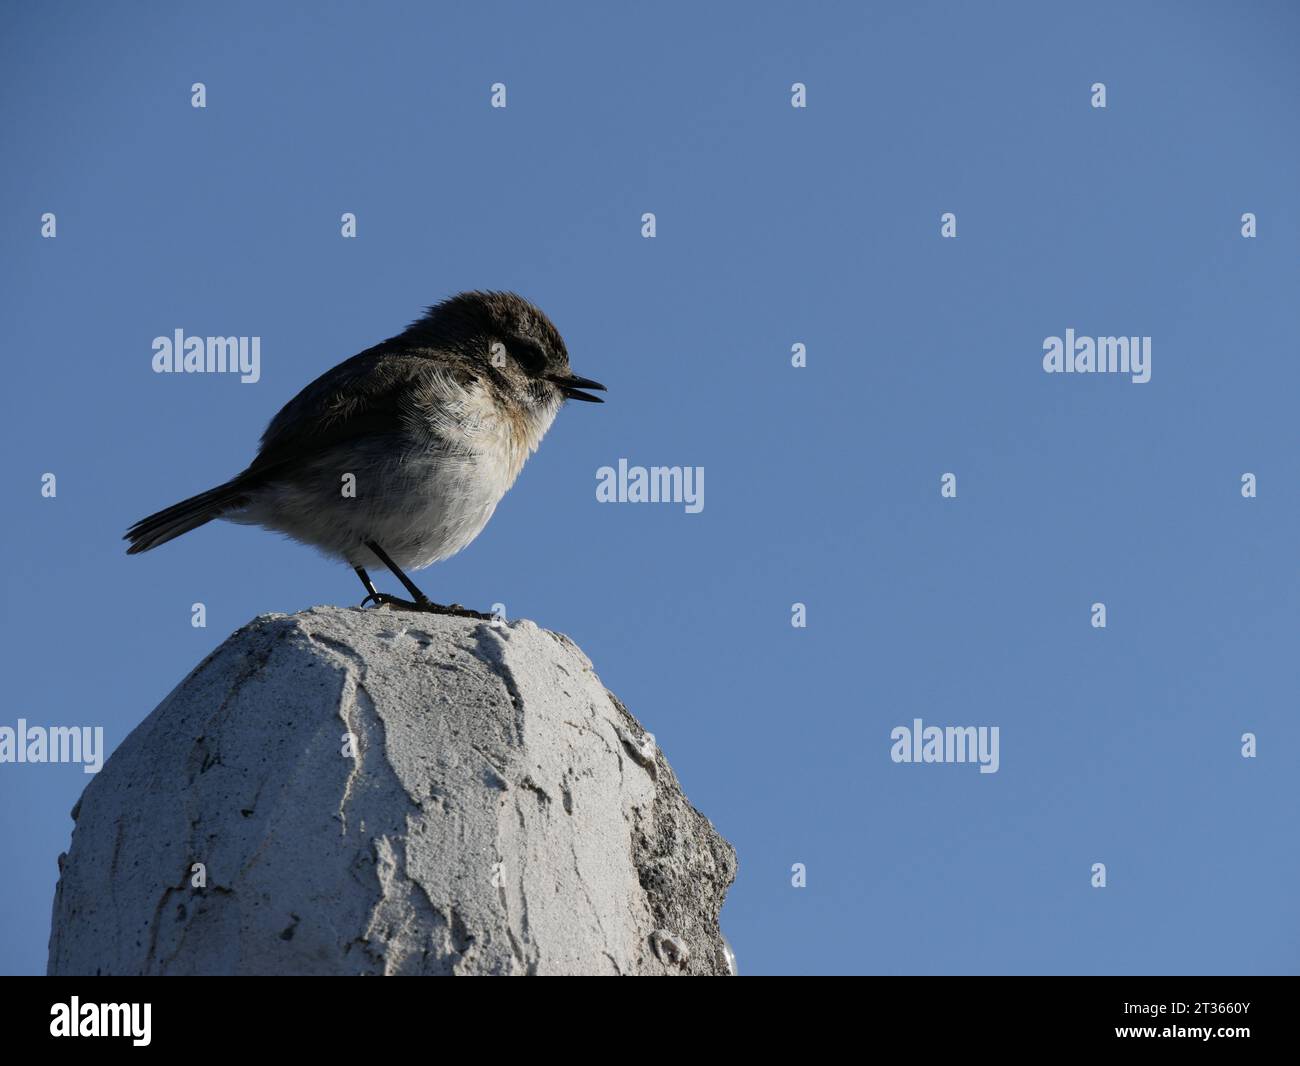 A tec tec bird or reunion stonechat on top of the statue in Maido Stock Photo